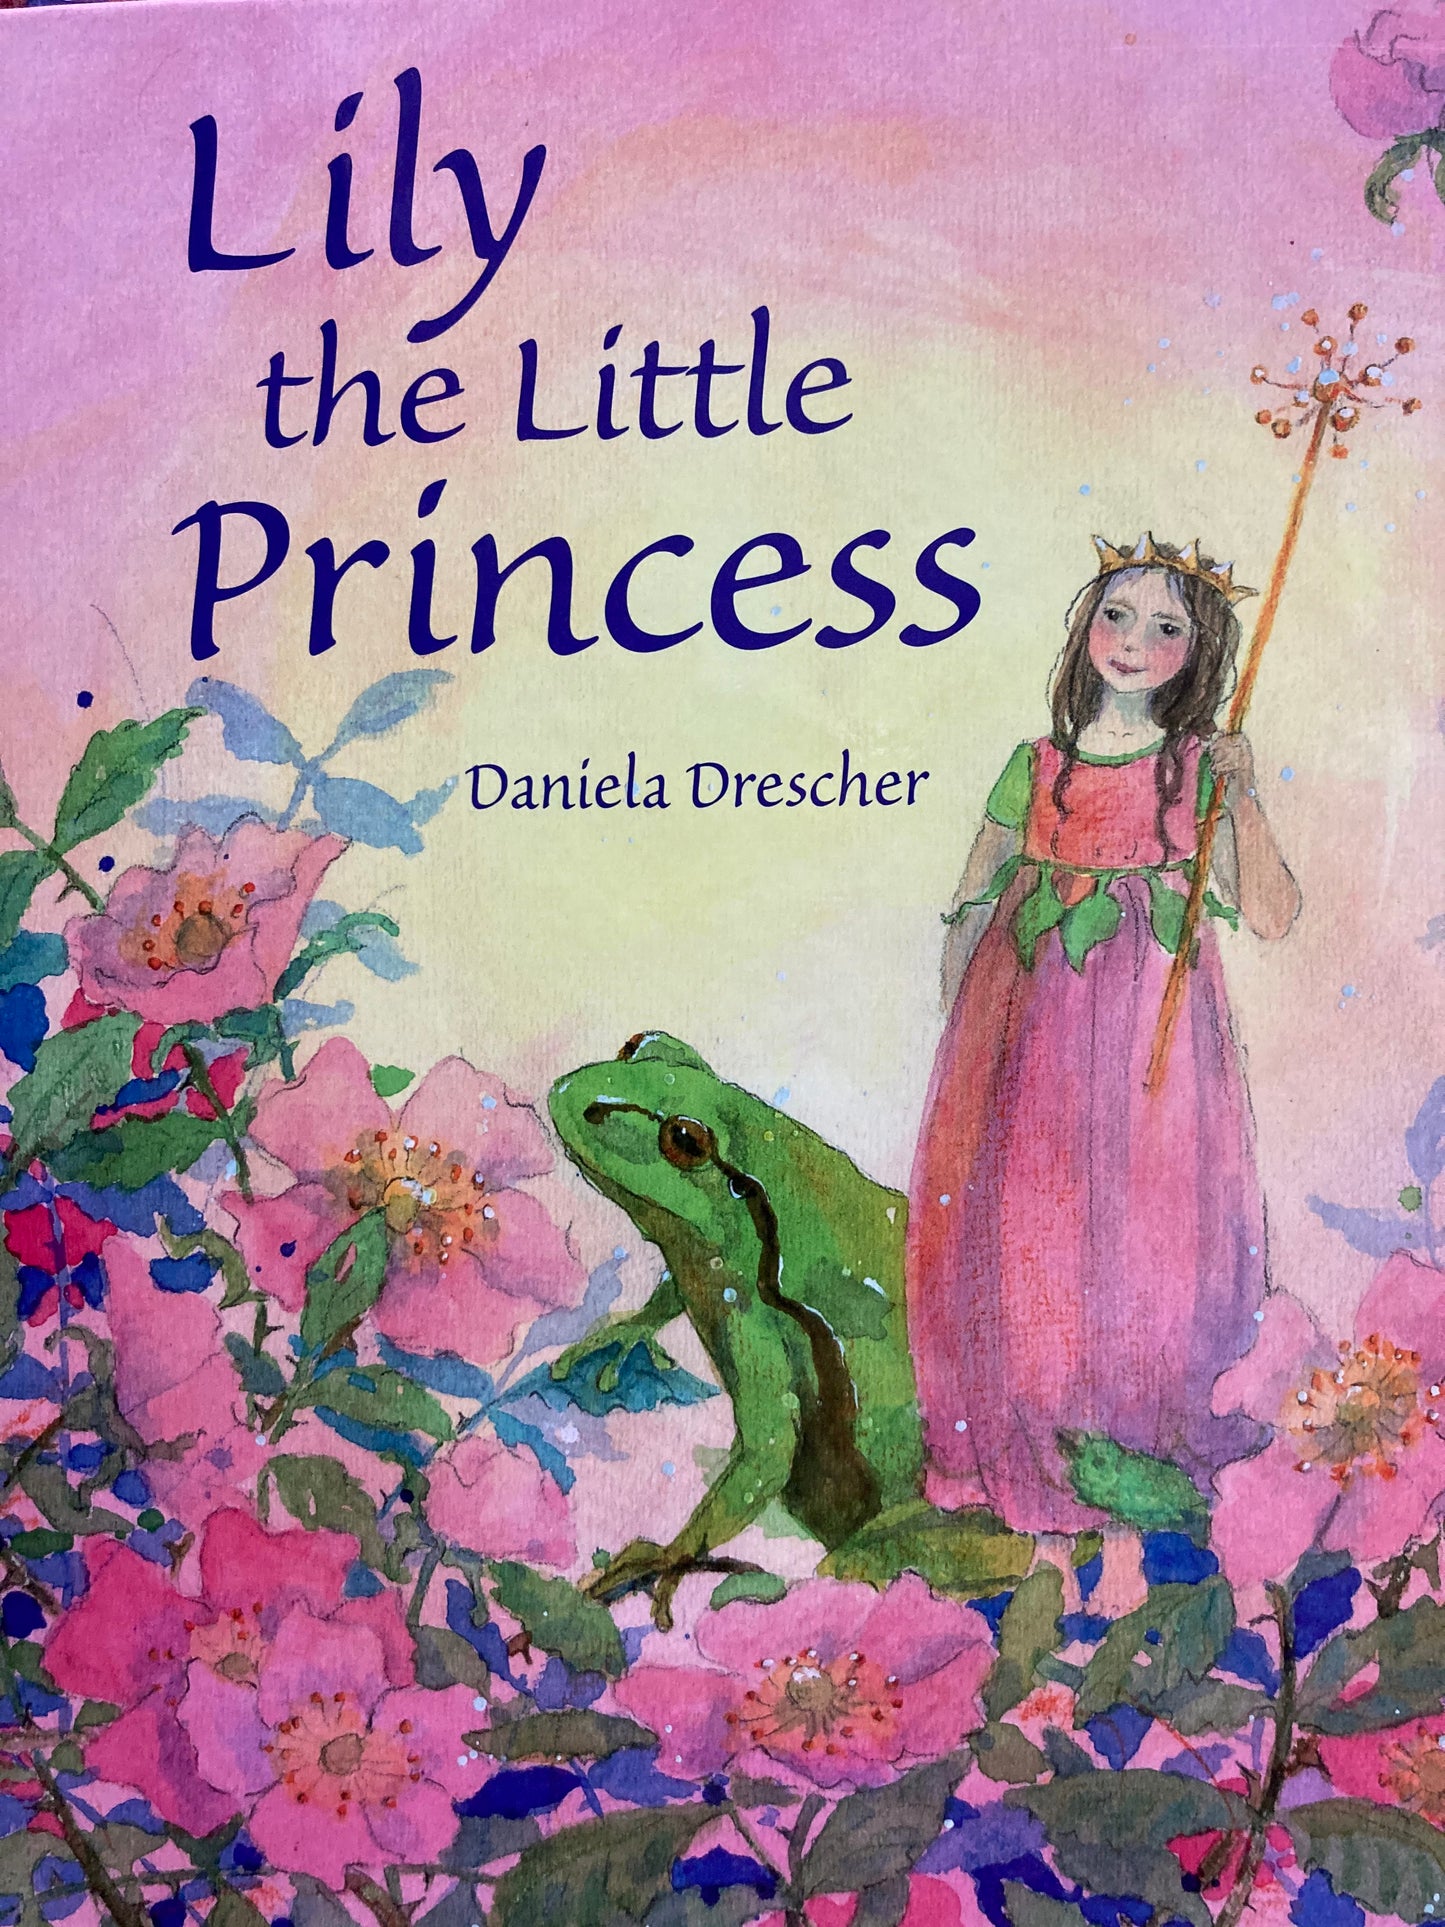 Children’s Picture Book - LILY THE LITTLE PRINCESS